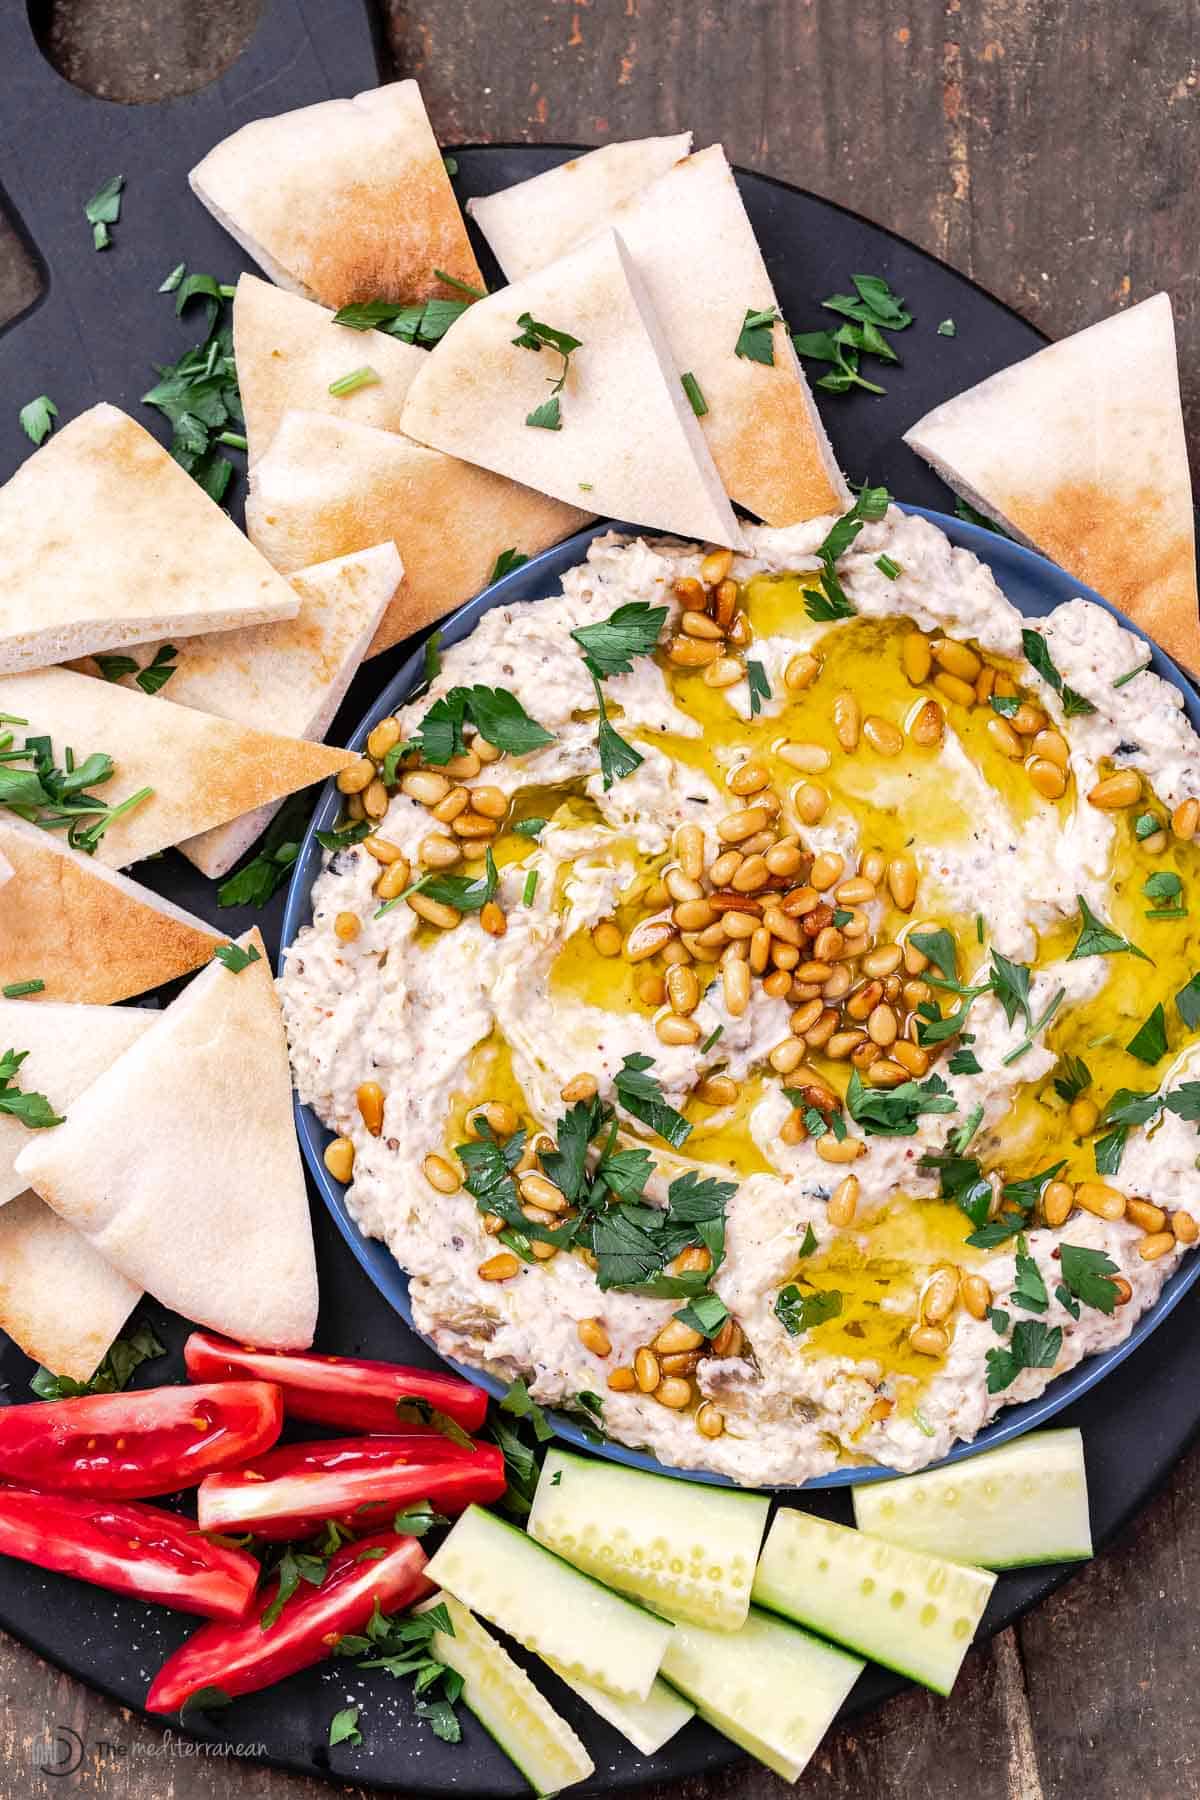 Baba ganoush dip topped with olive oil and toasted nuts and served with bell peppers, cucumbers and pita bread wedges